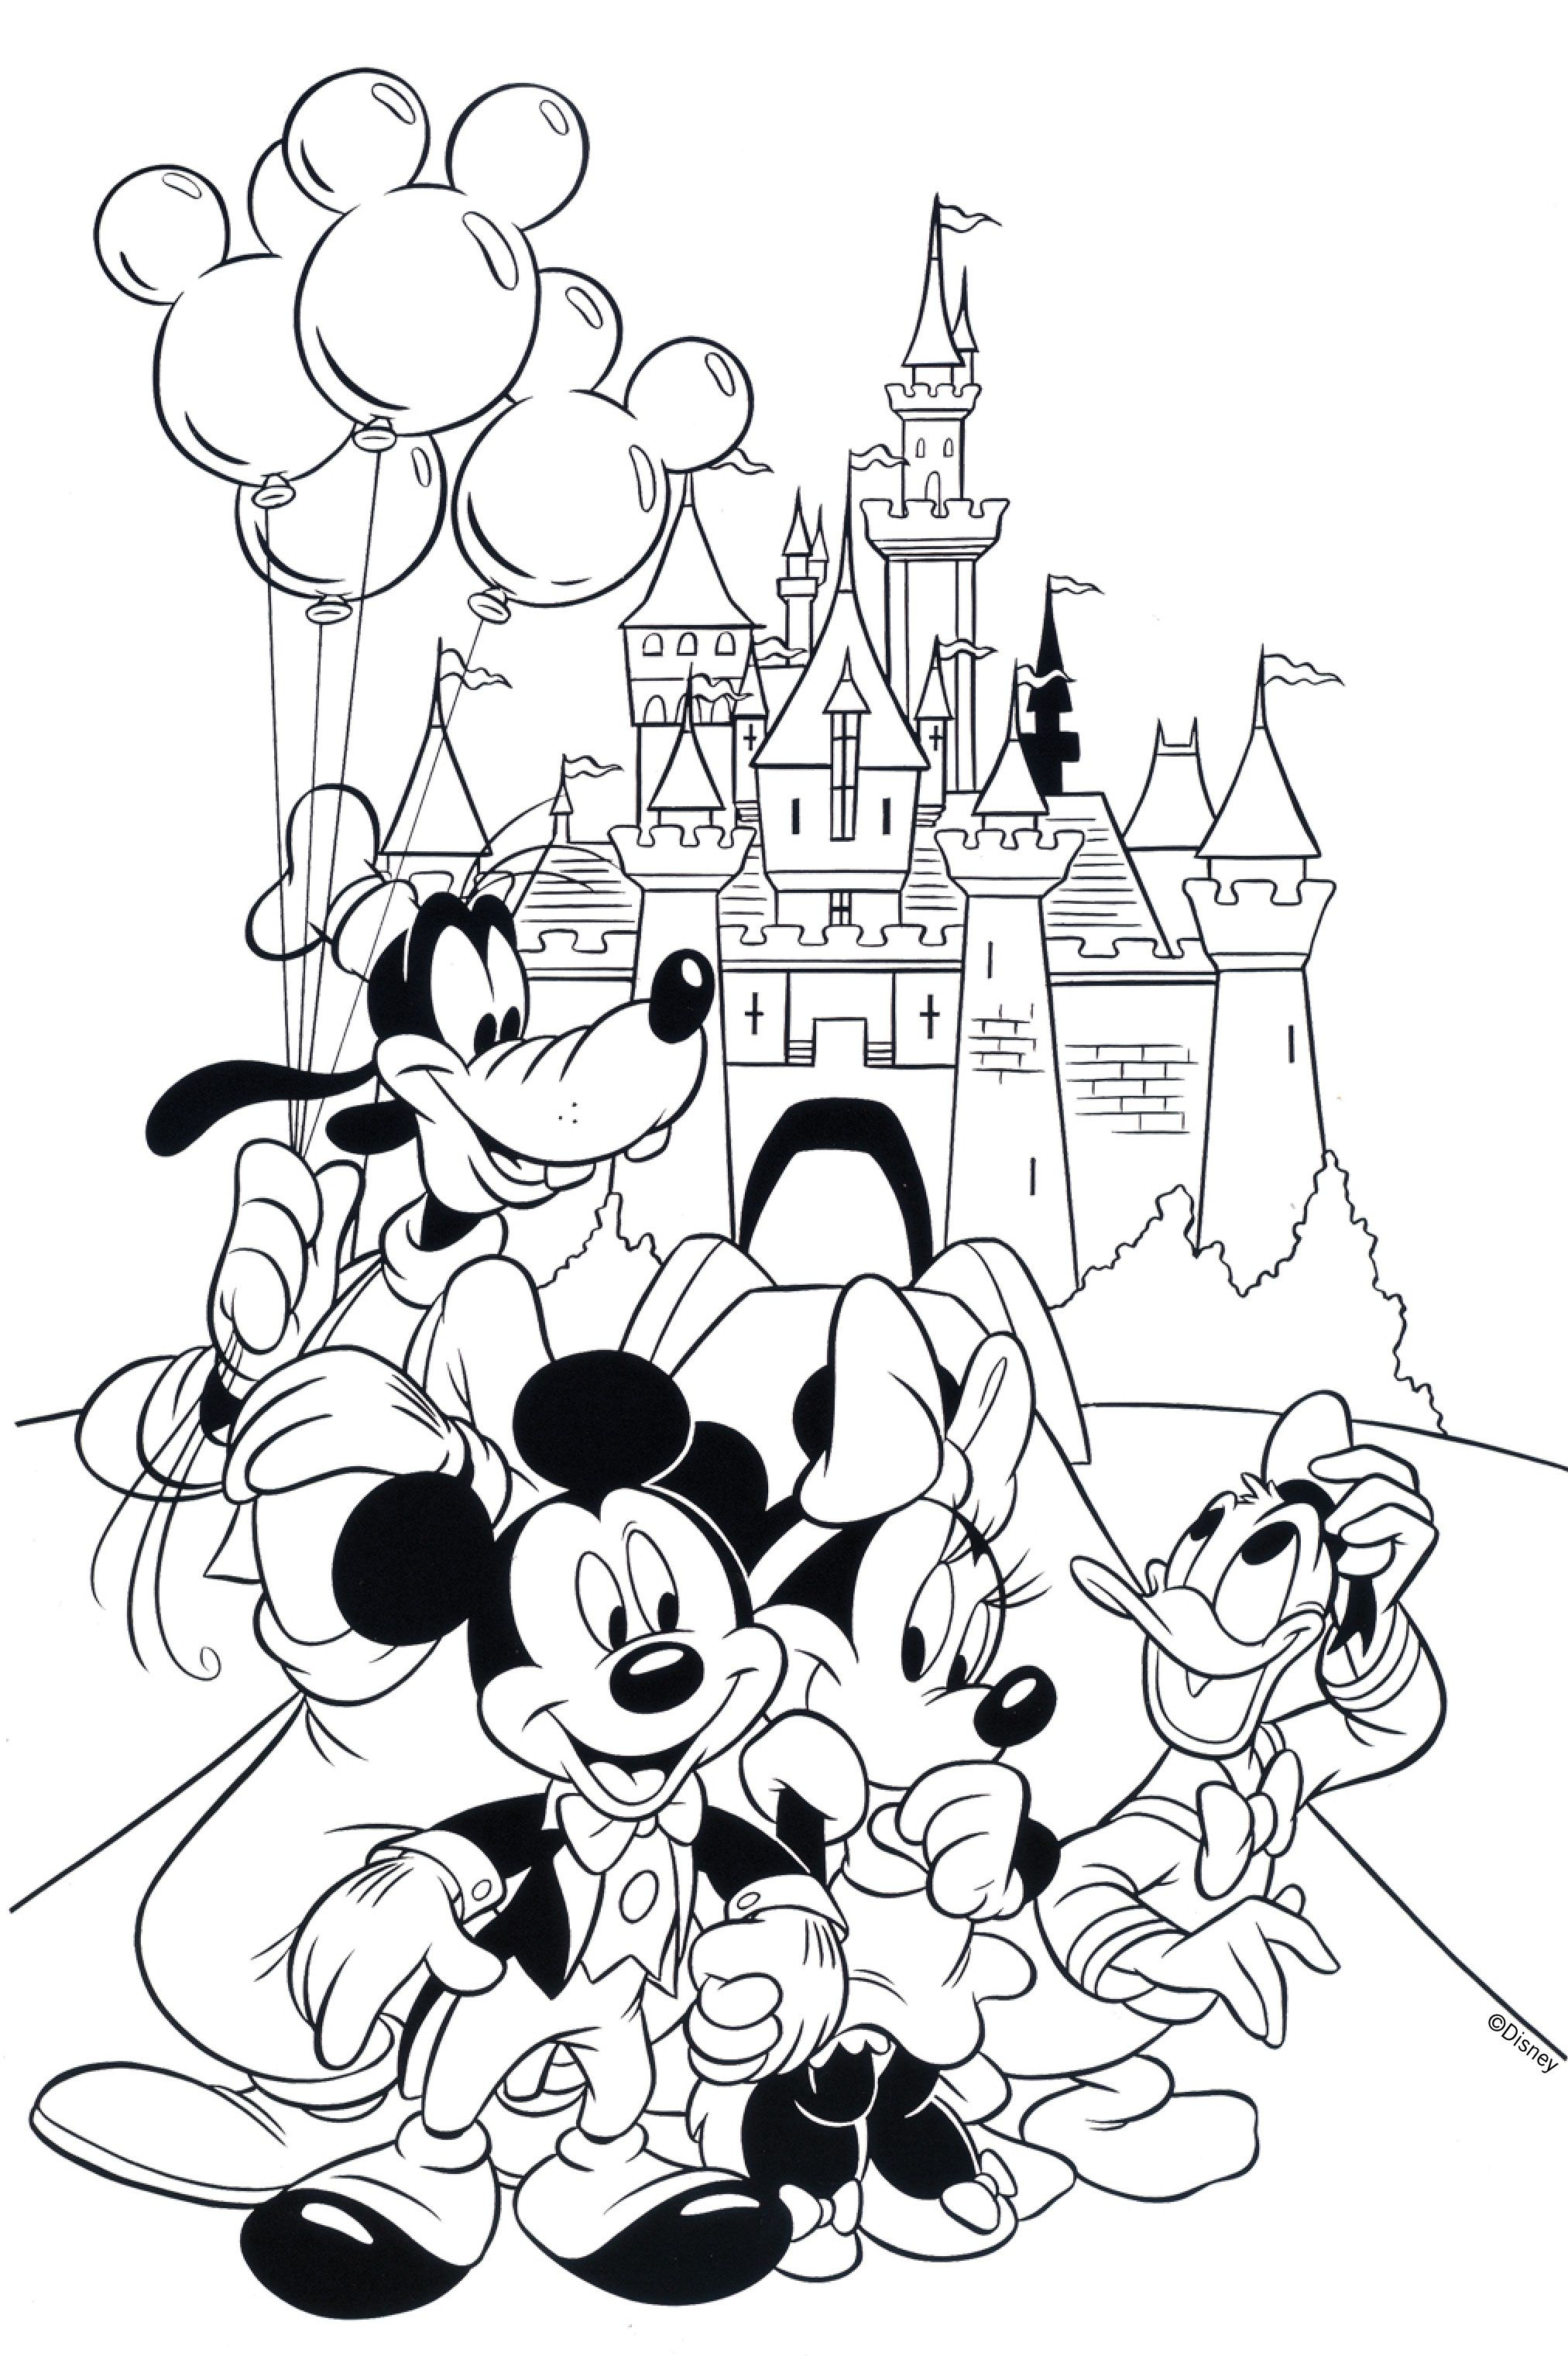 Free Disney Coloring Pages | Coloring Books | Pinterest | Coloring - Free Printable Disney Coloring Pages